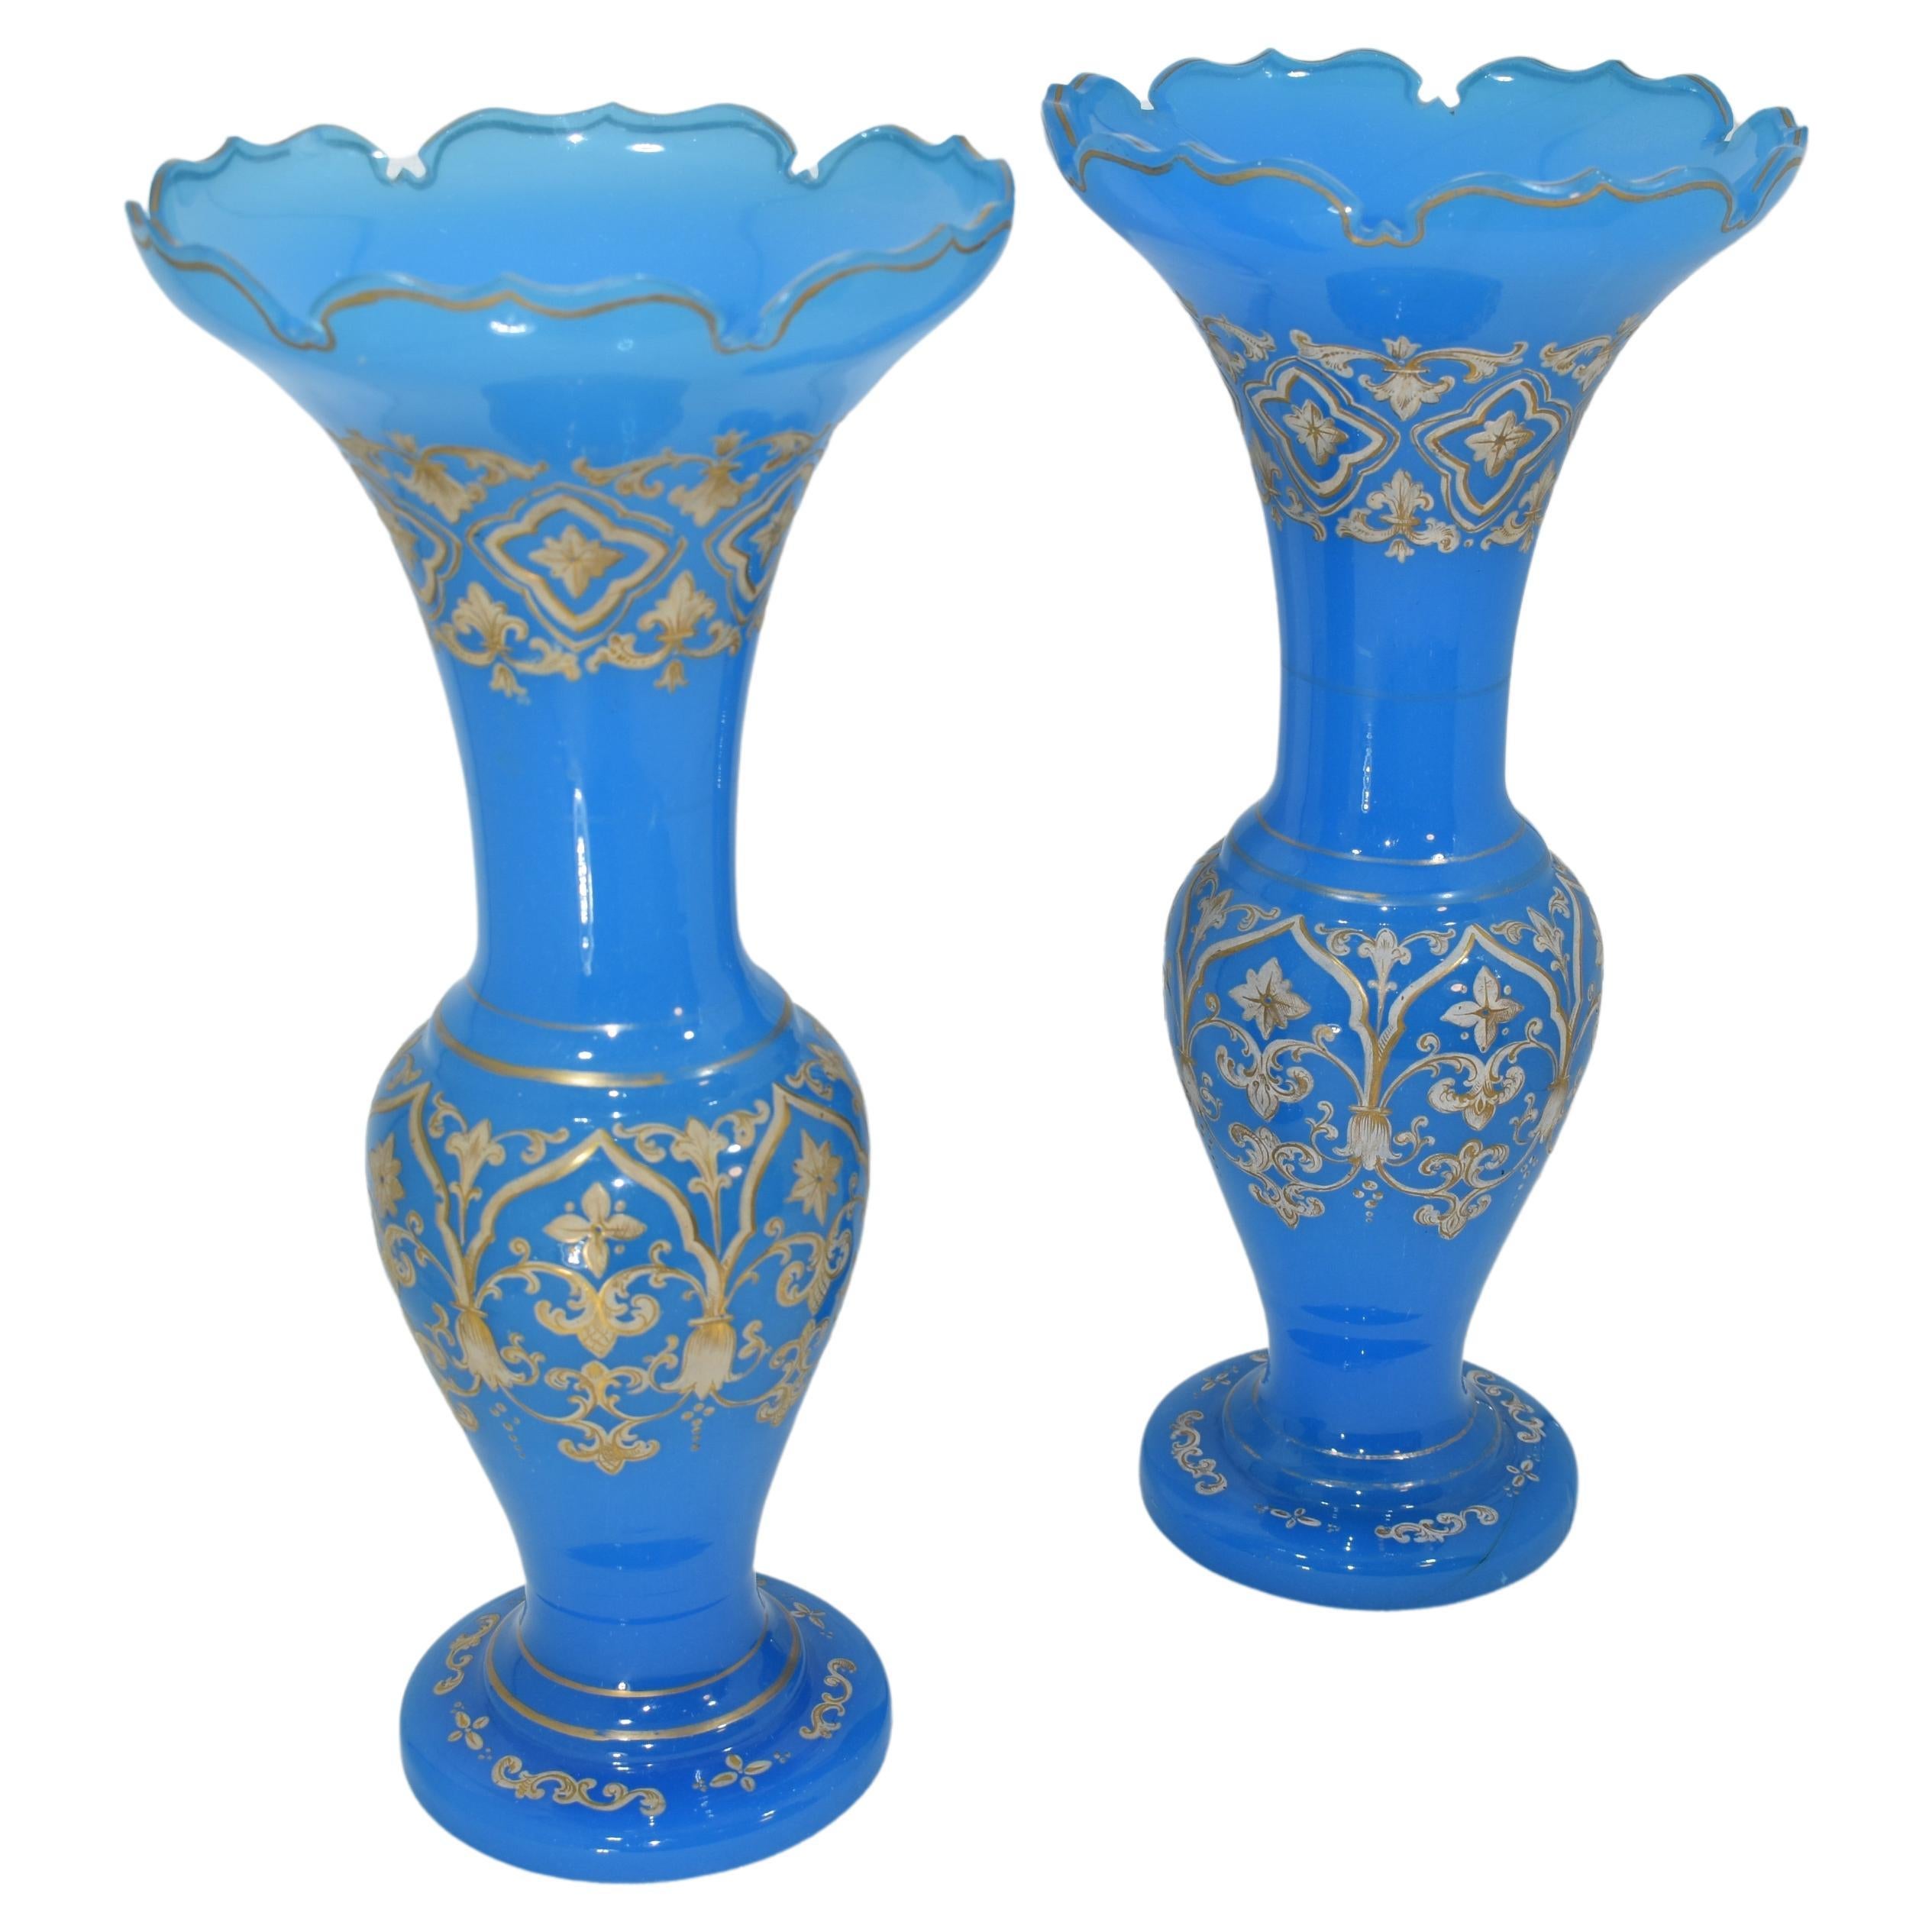 Large Pair of Antique Bohemian Opaline Enameled Glass Vases, 19th Century In Good Condition For Sale In Rostock, MV